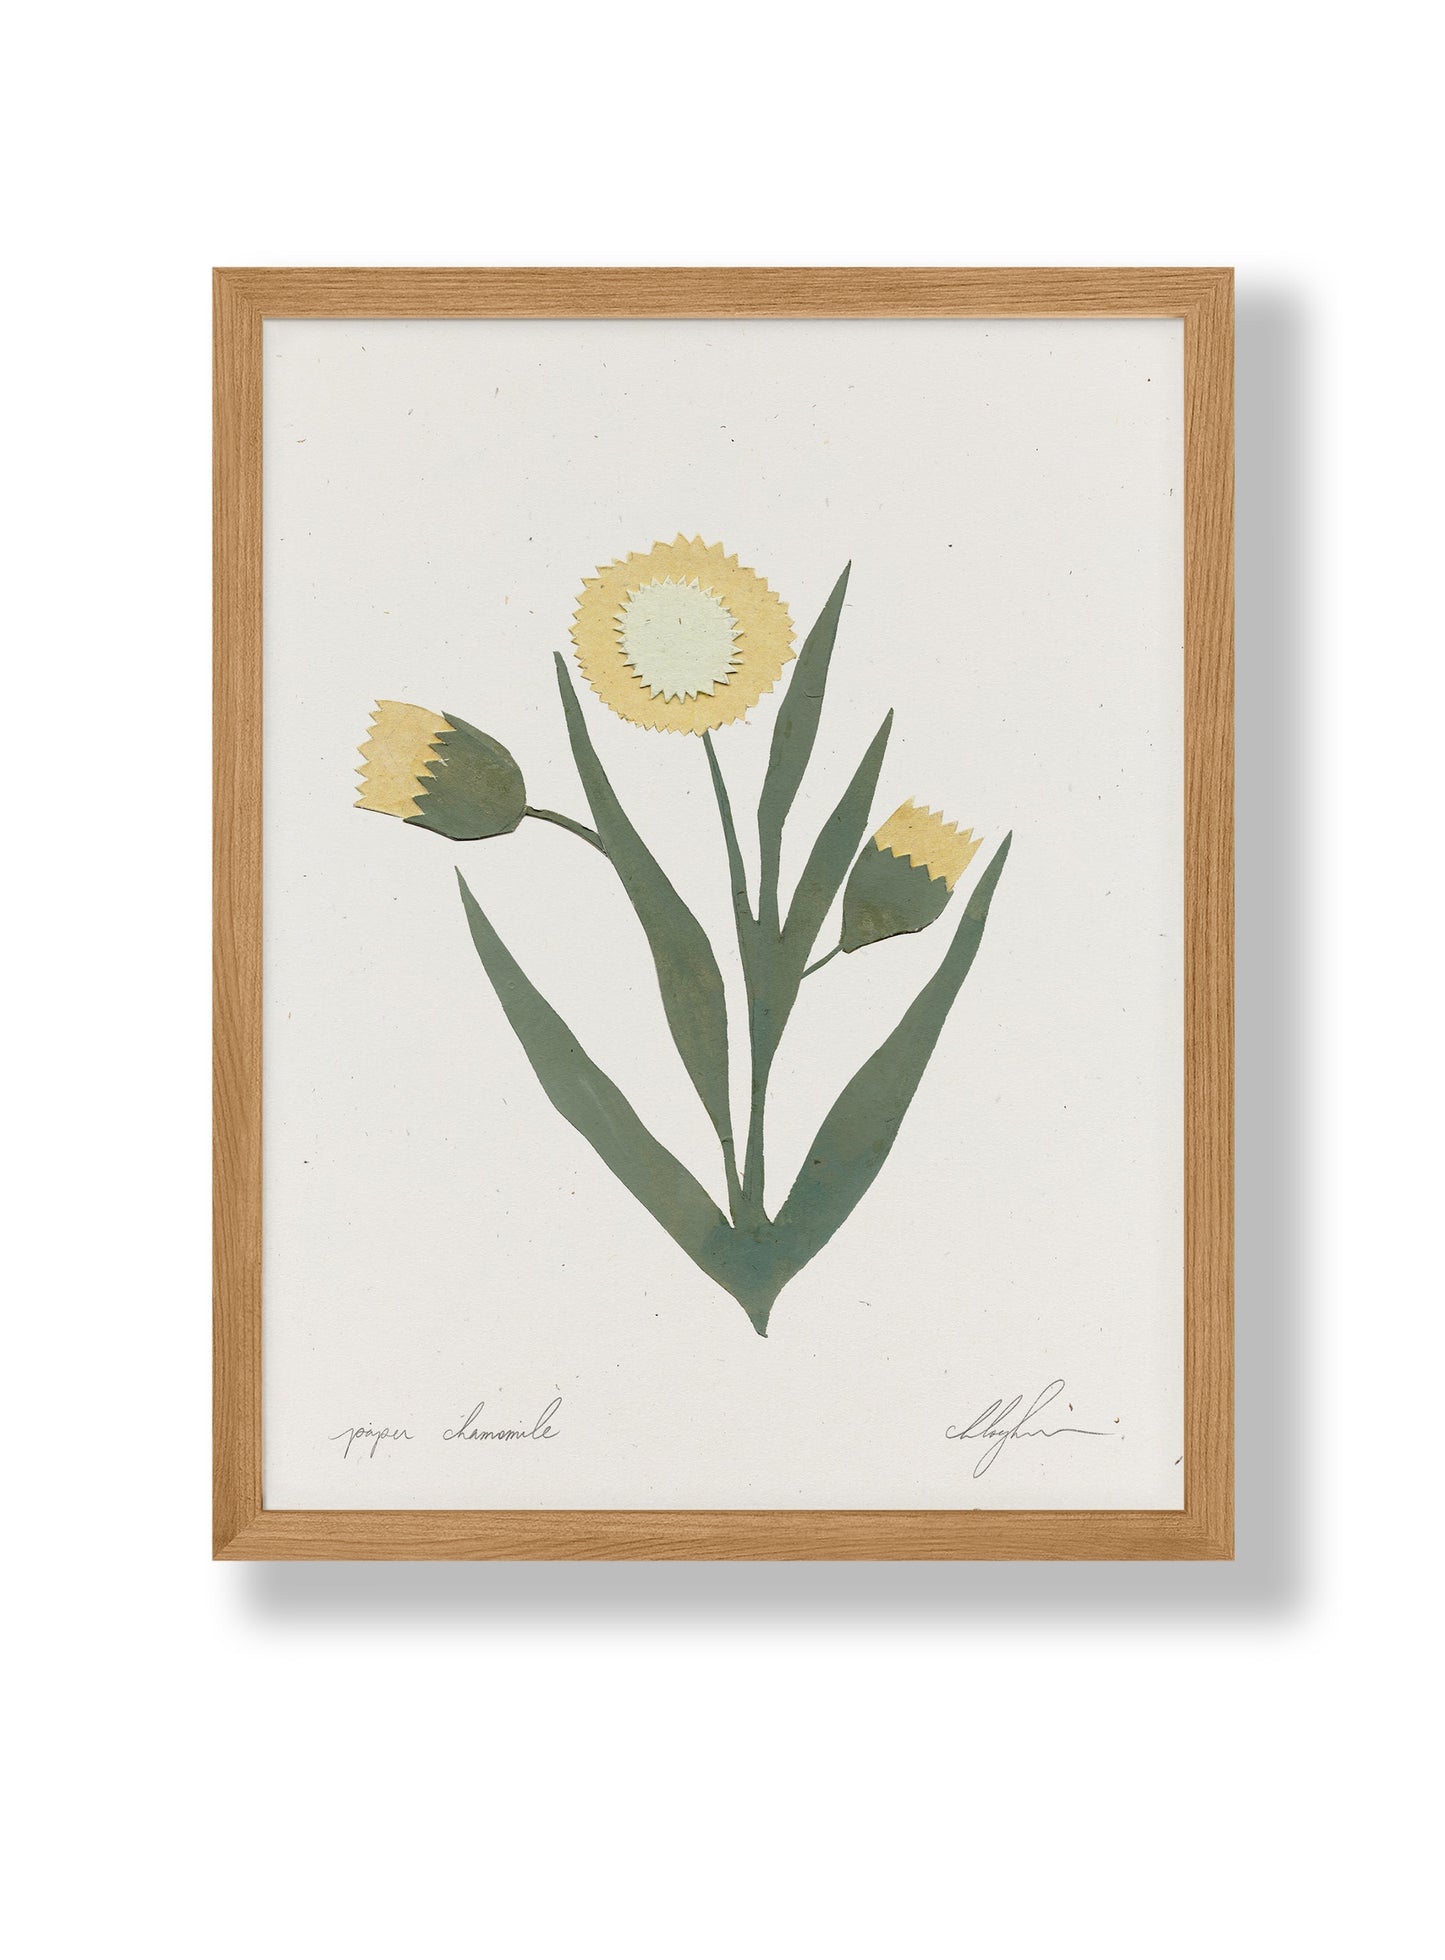 Paper Chamomile by Coco Shalom. Prints are made with 100% recycled paper, containing 30% post consumer waste, produced with 100% green power and 0% BS.